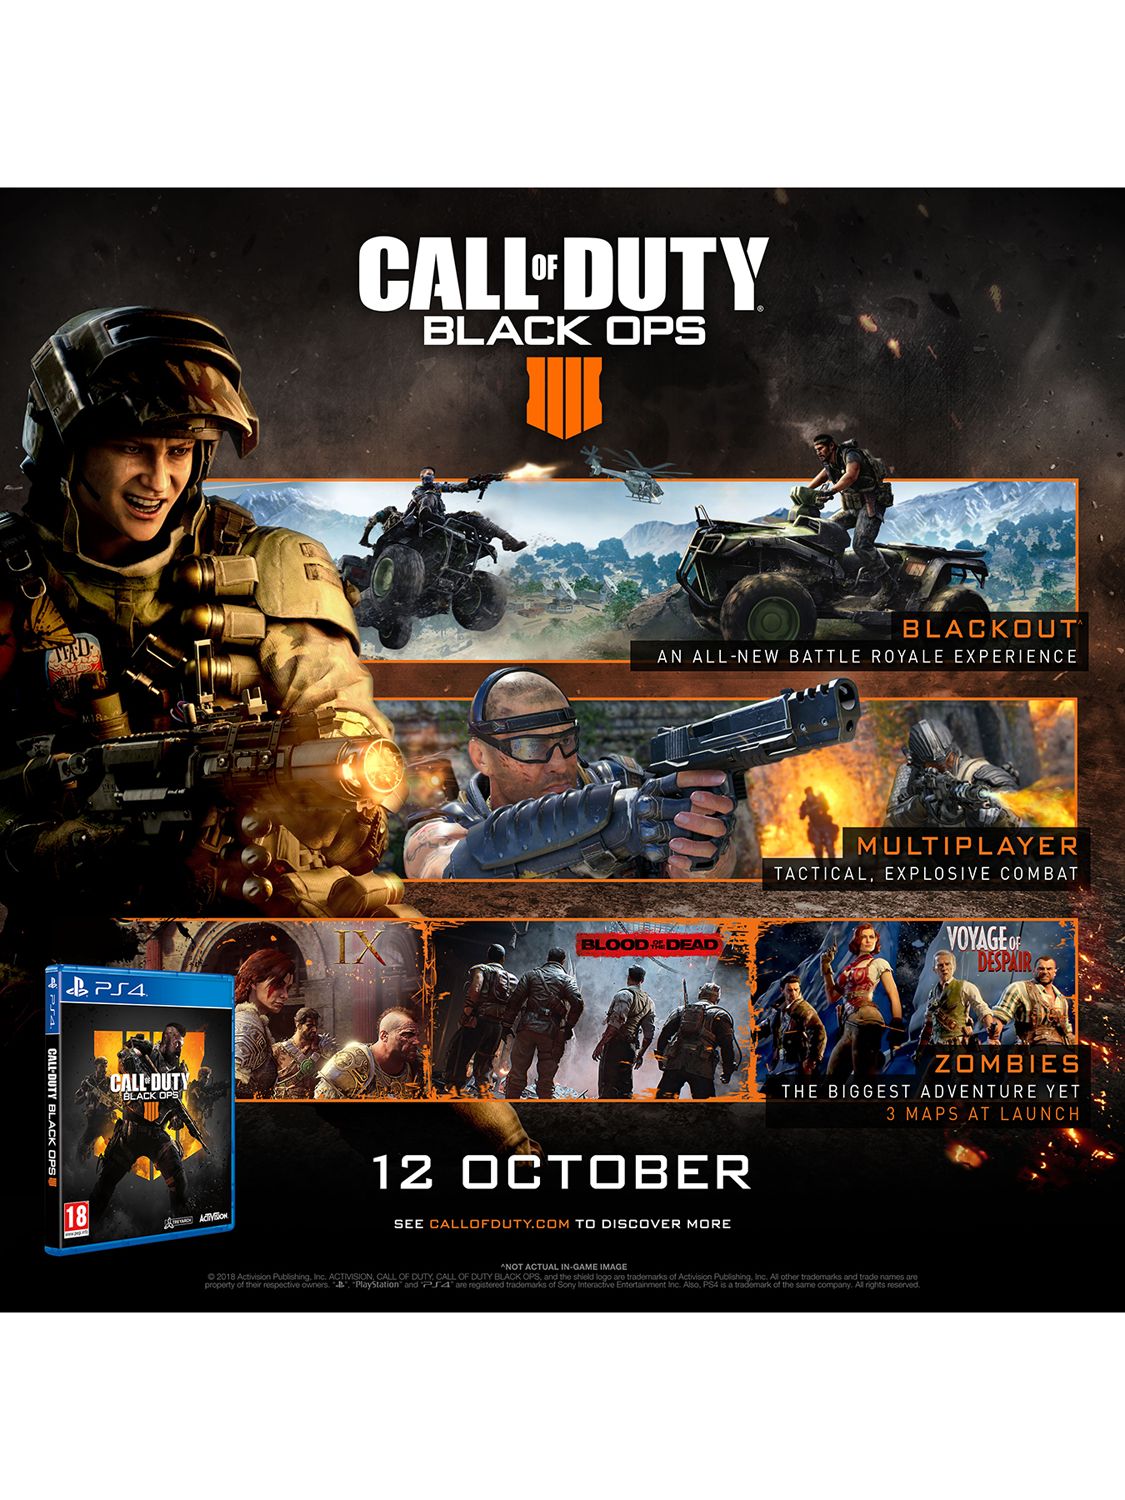 call of duty black ops 4 for playstation 4